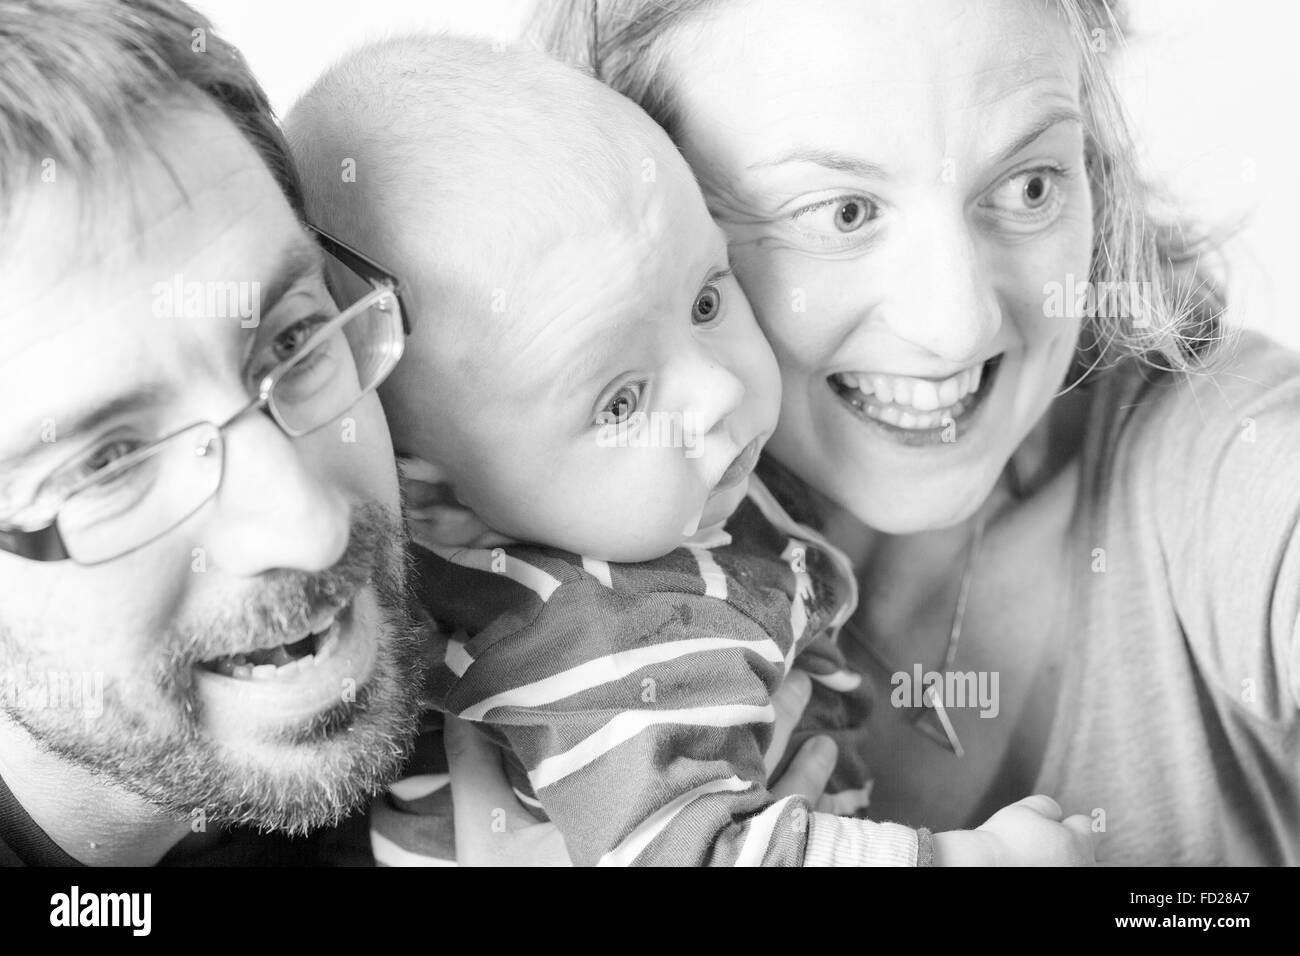 Happy and smiling portrait of Young Parents With Their Baby boy 4 month old Concept happy family Stock Photo